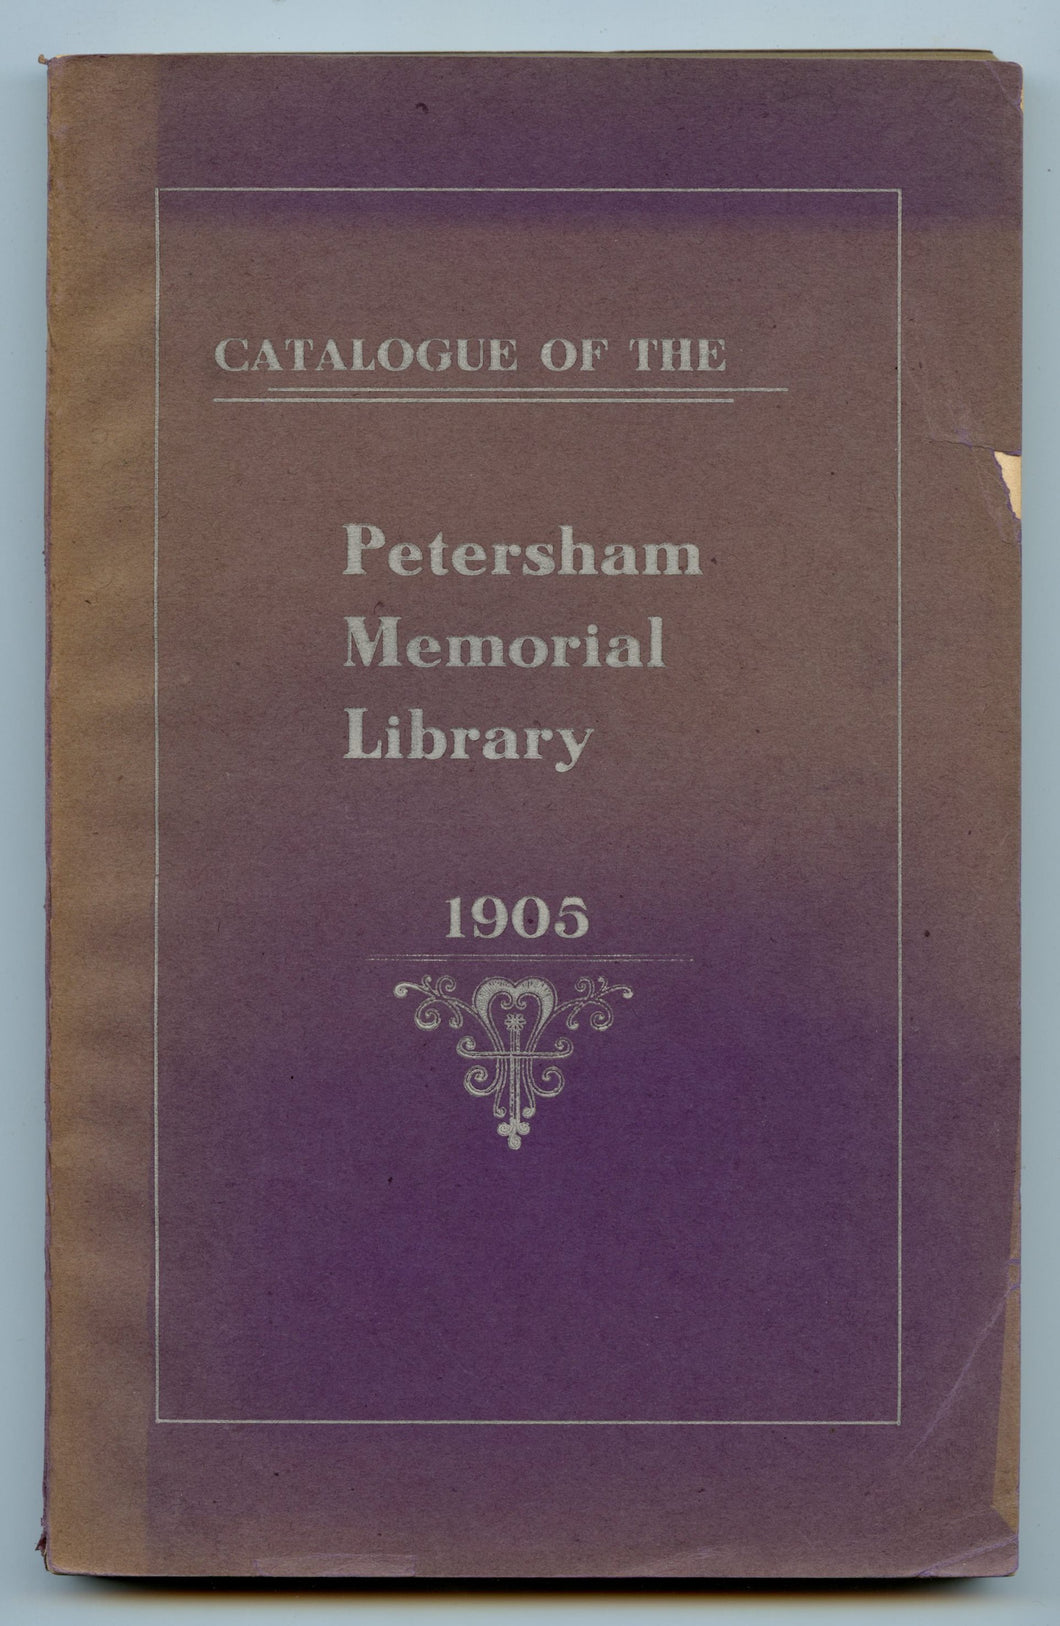 Catalogue of the Petersham Memorial Library 1905